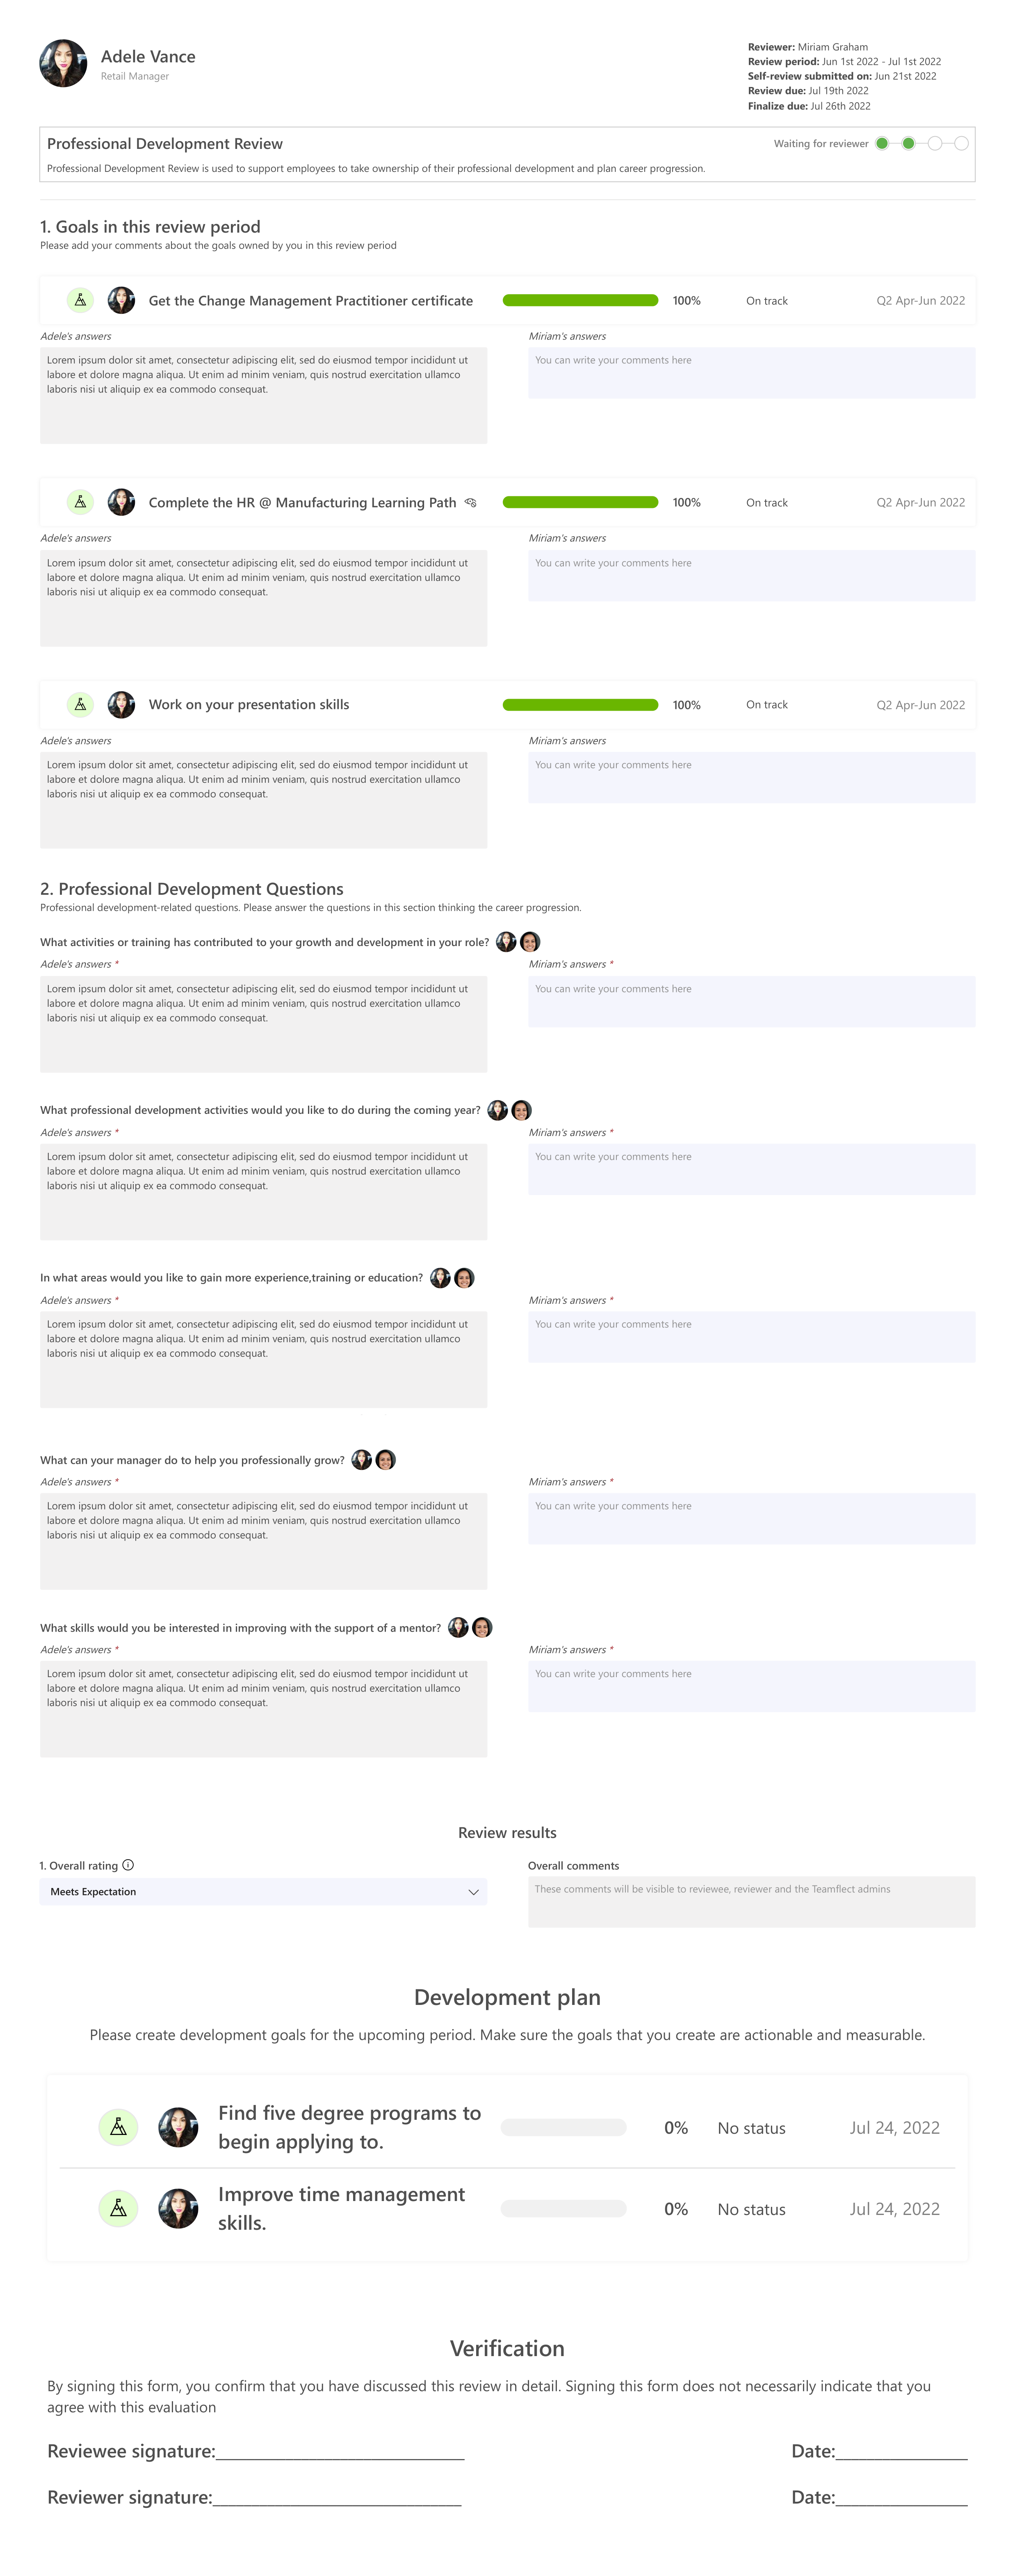 Teamflect projessional development review template in Microsoft Teams